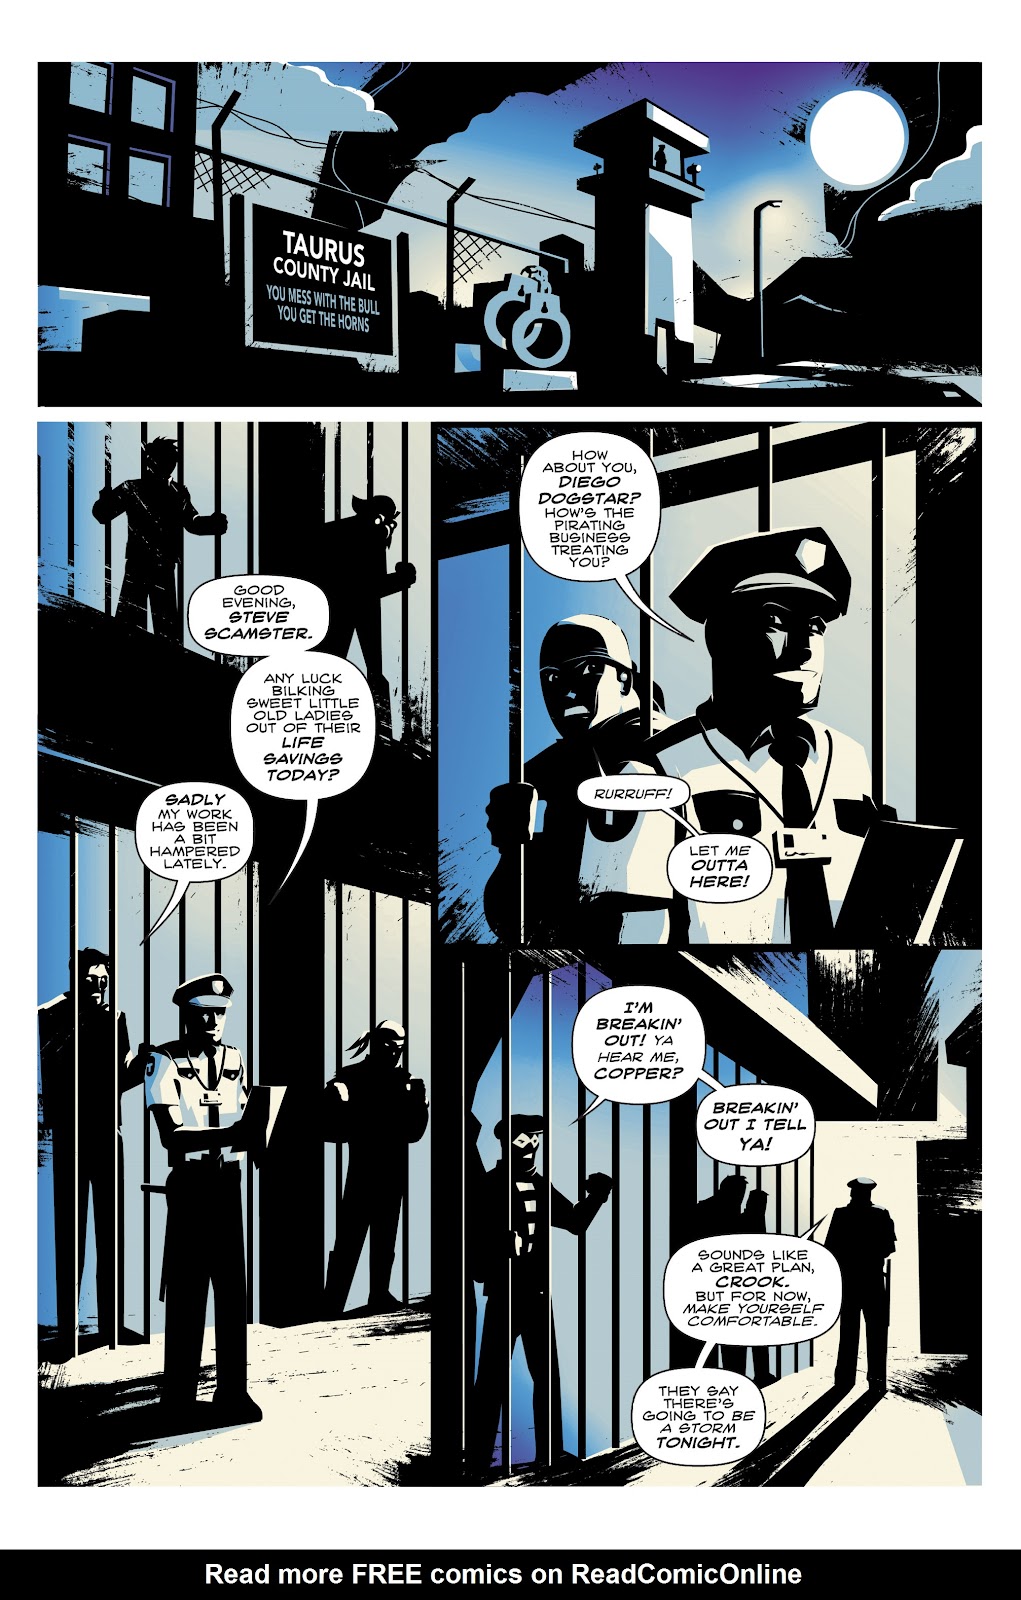 Hero Cats: Midnight Over Stellar City Vol. 2 issue 1 - Page 2